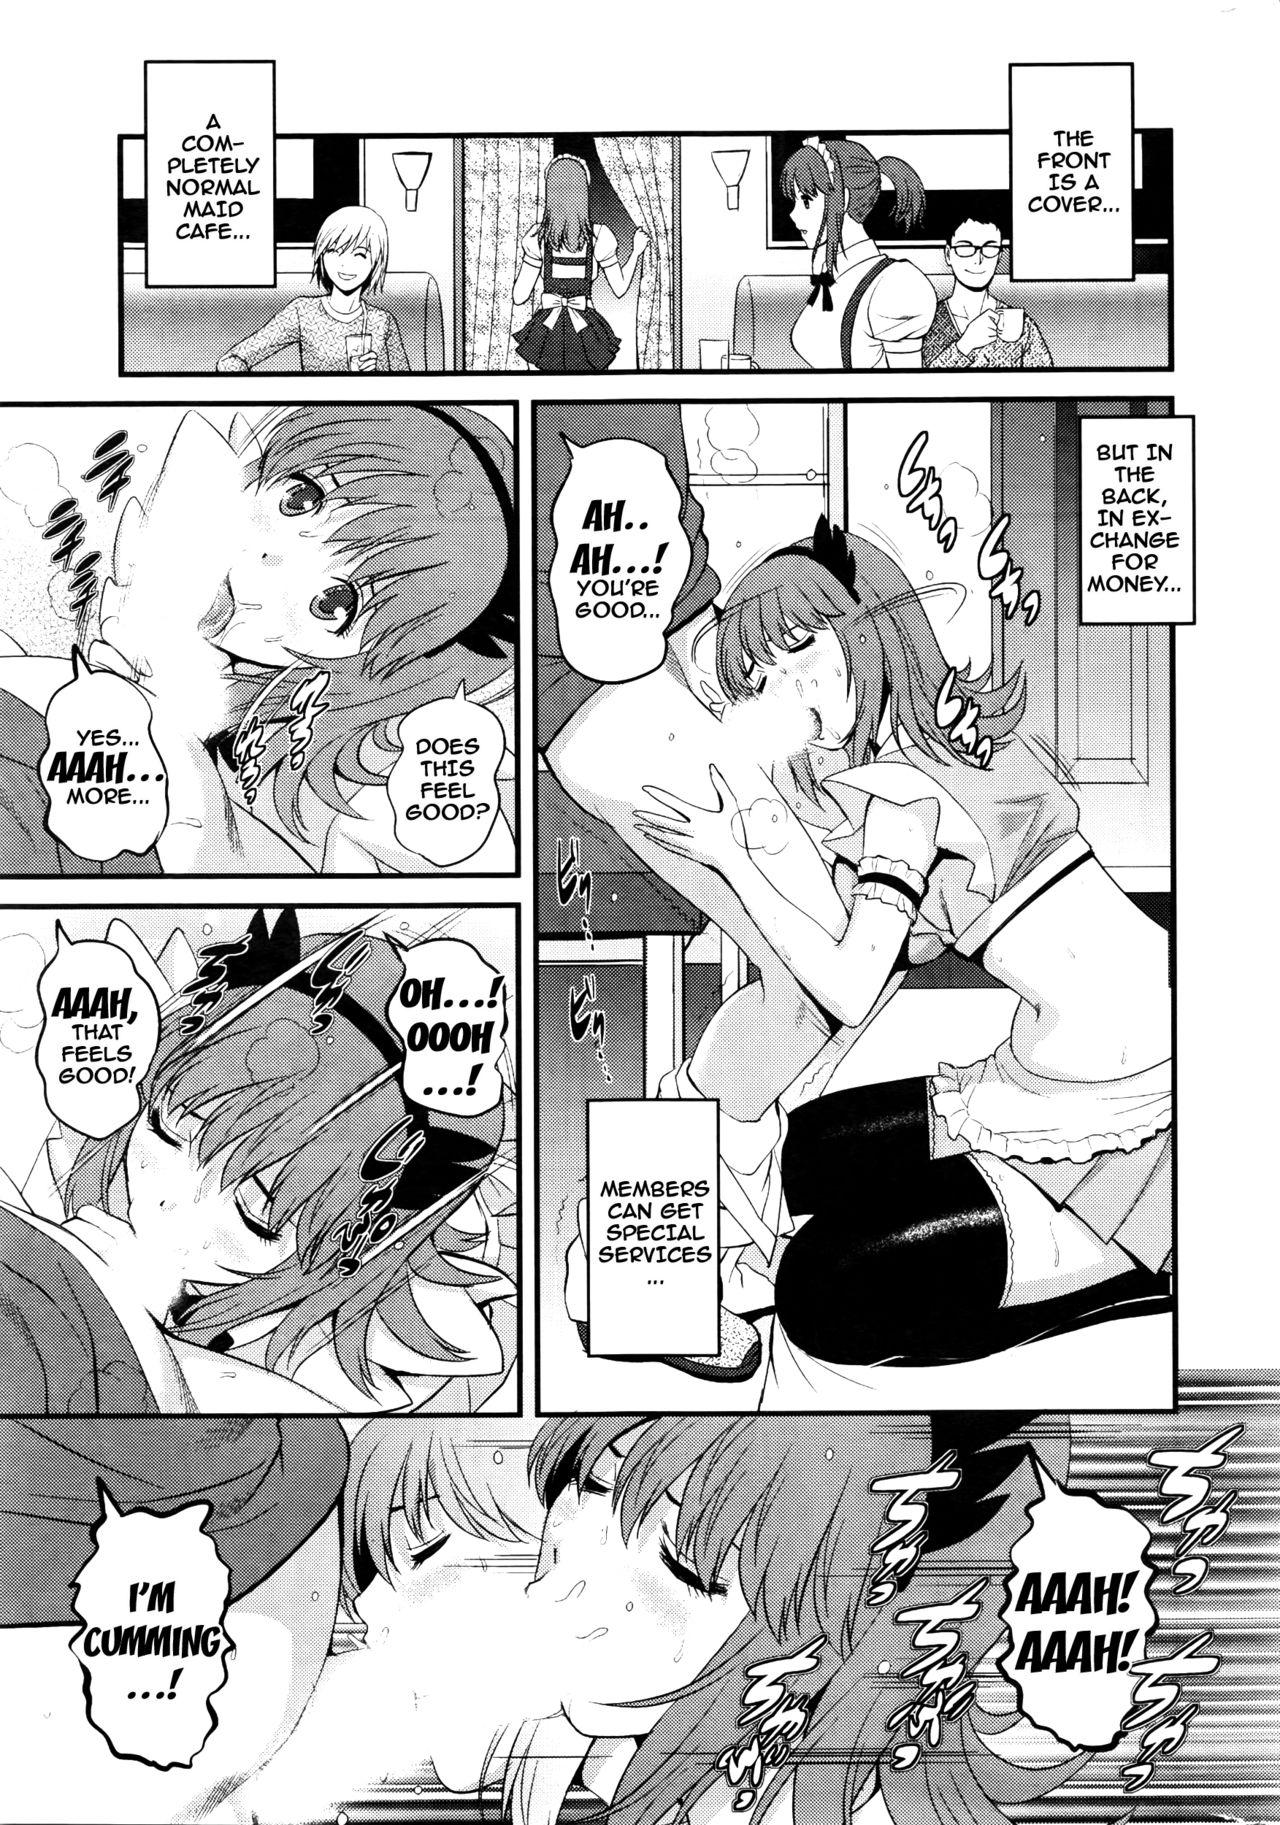 Cosplay [Saigado] Part Time Manaka-san 2nd Ch. 1-5 [English] {doujins.com} [Incomplete] Officesex - Page 8